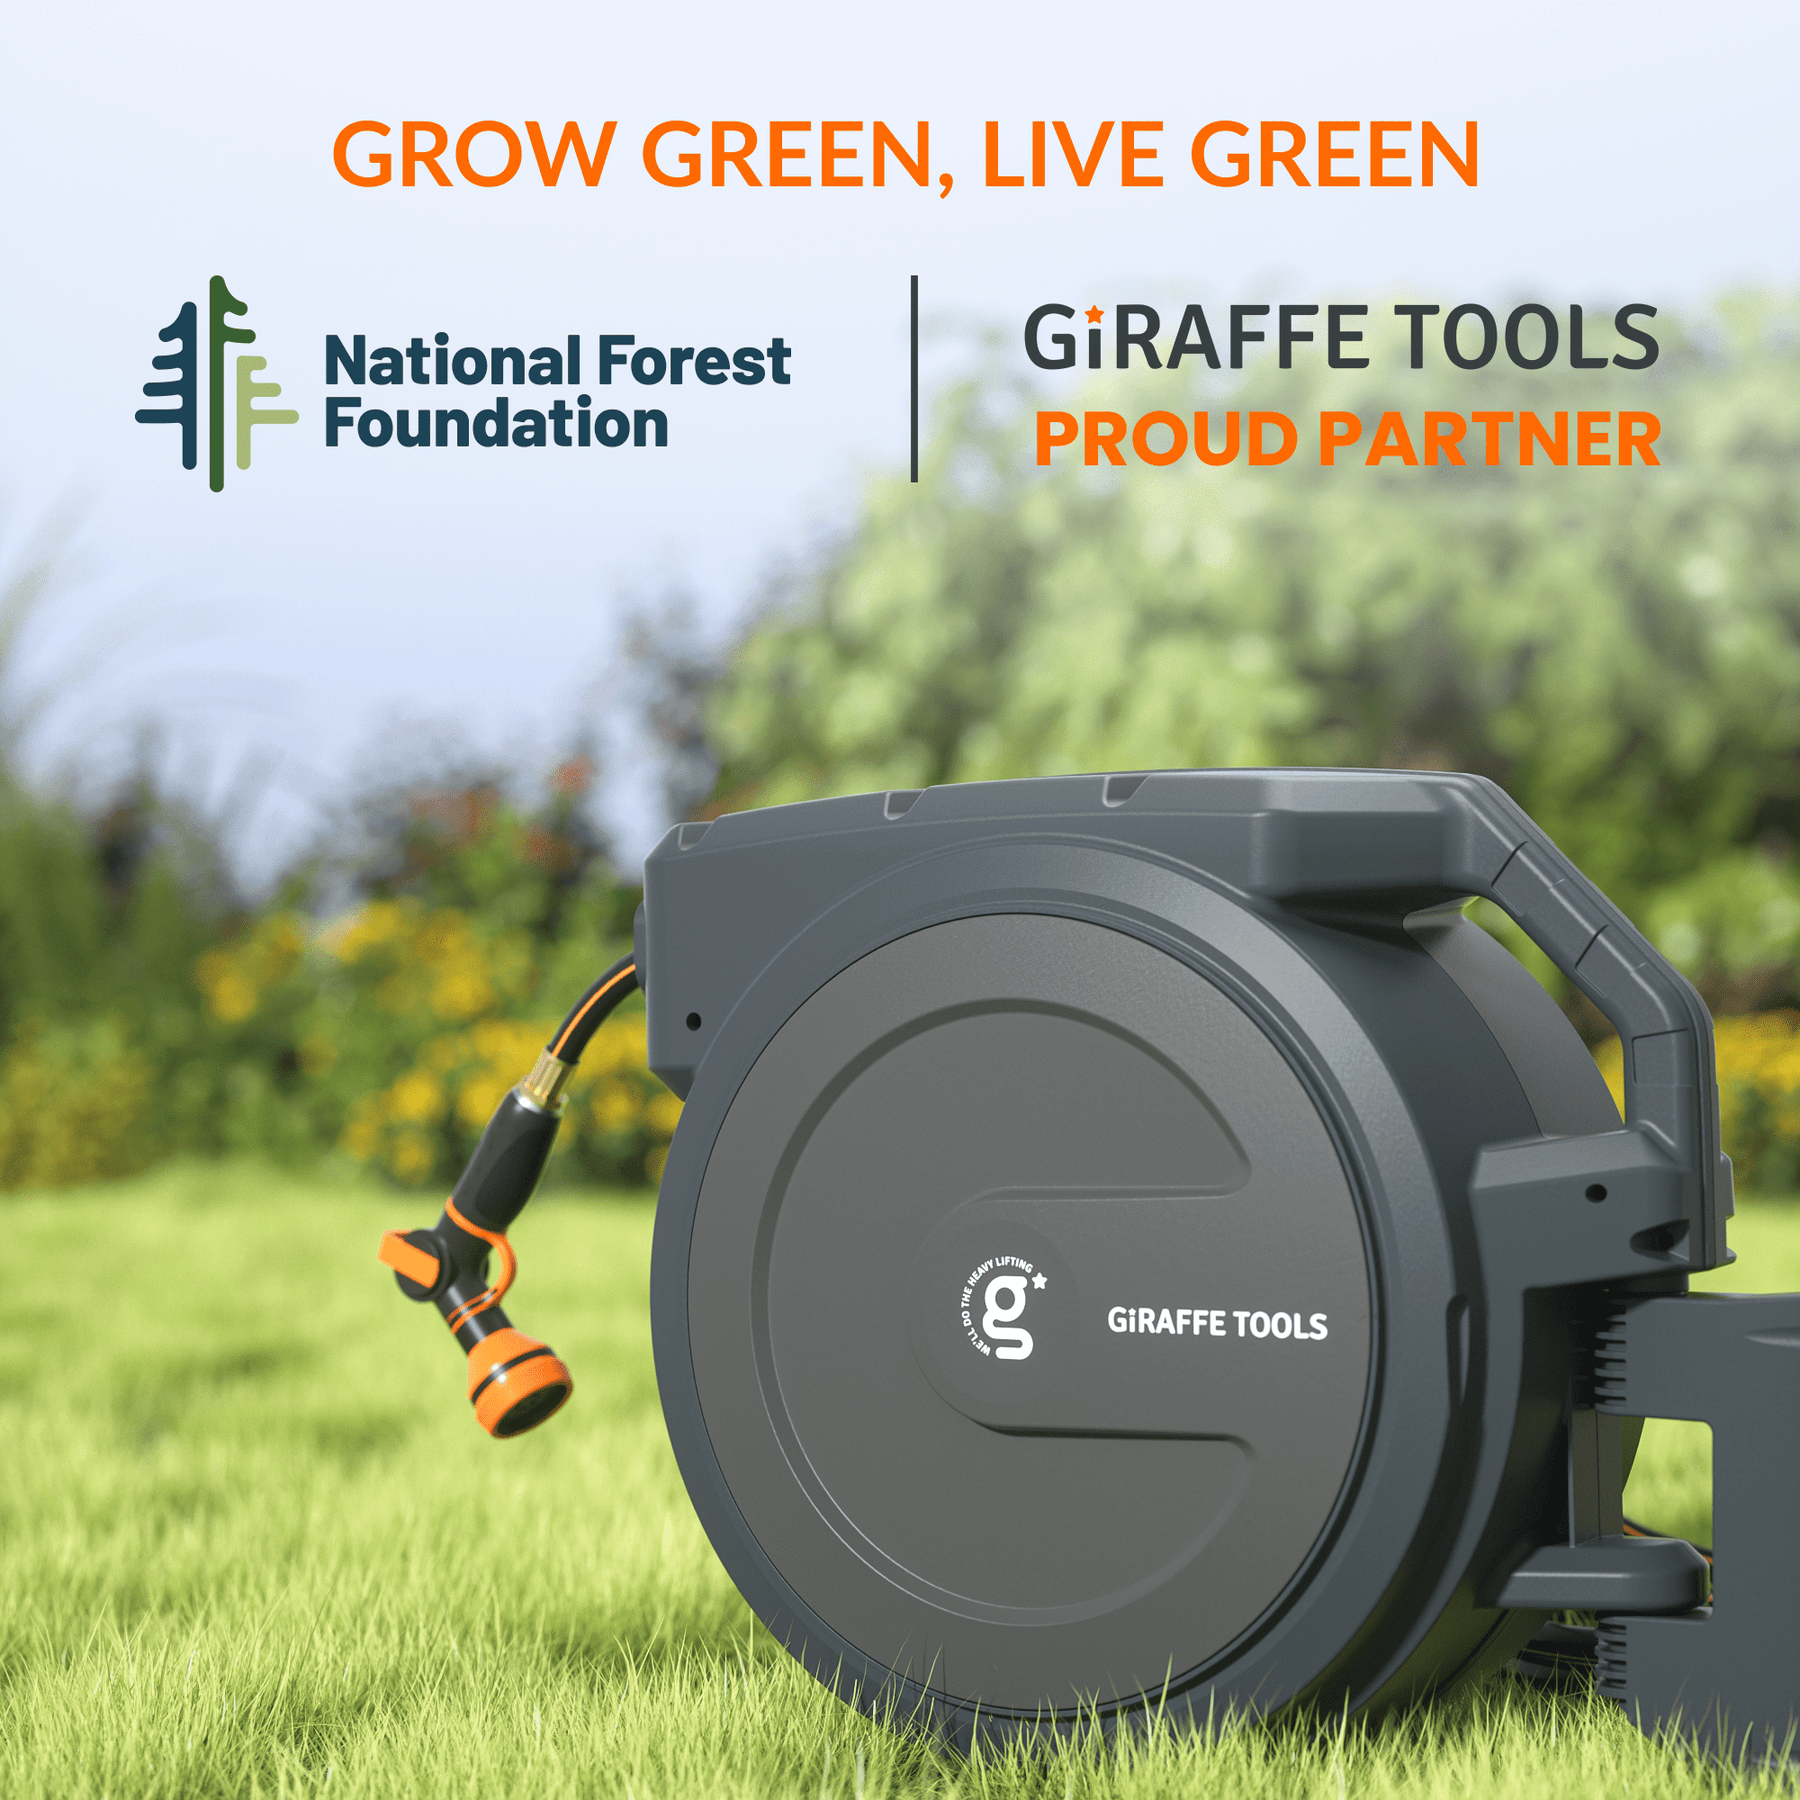 Giraffe Tools Retractable Air Hose Reel 3/8 x 50 ft Hybrid Hose for Air  Compressor and AW405/8MB Retractable Garden Hose Reel 5/8 x 90 ft Metal